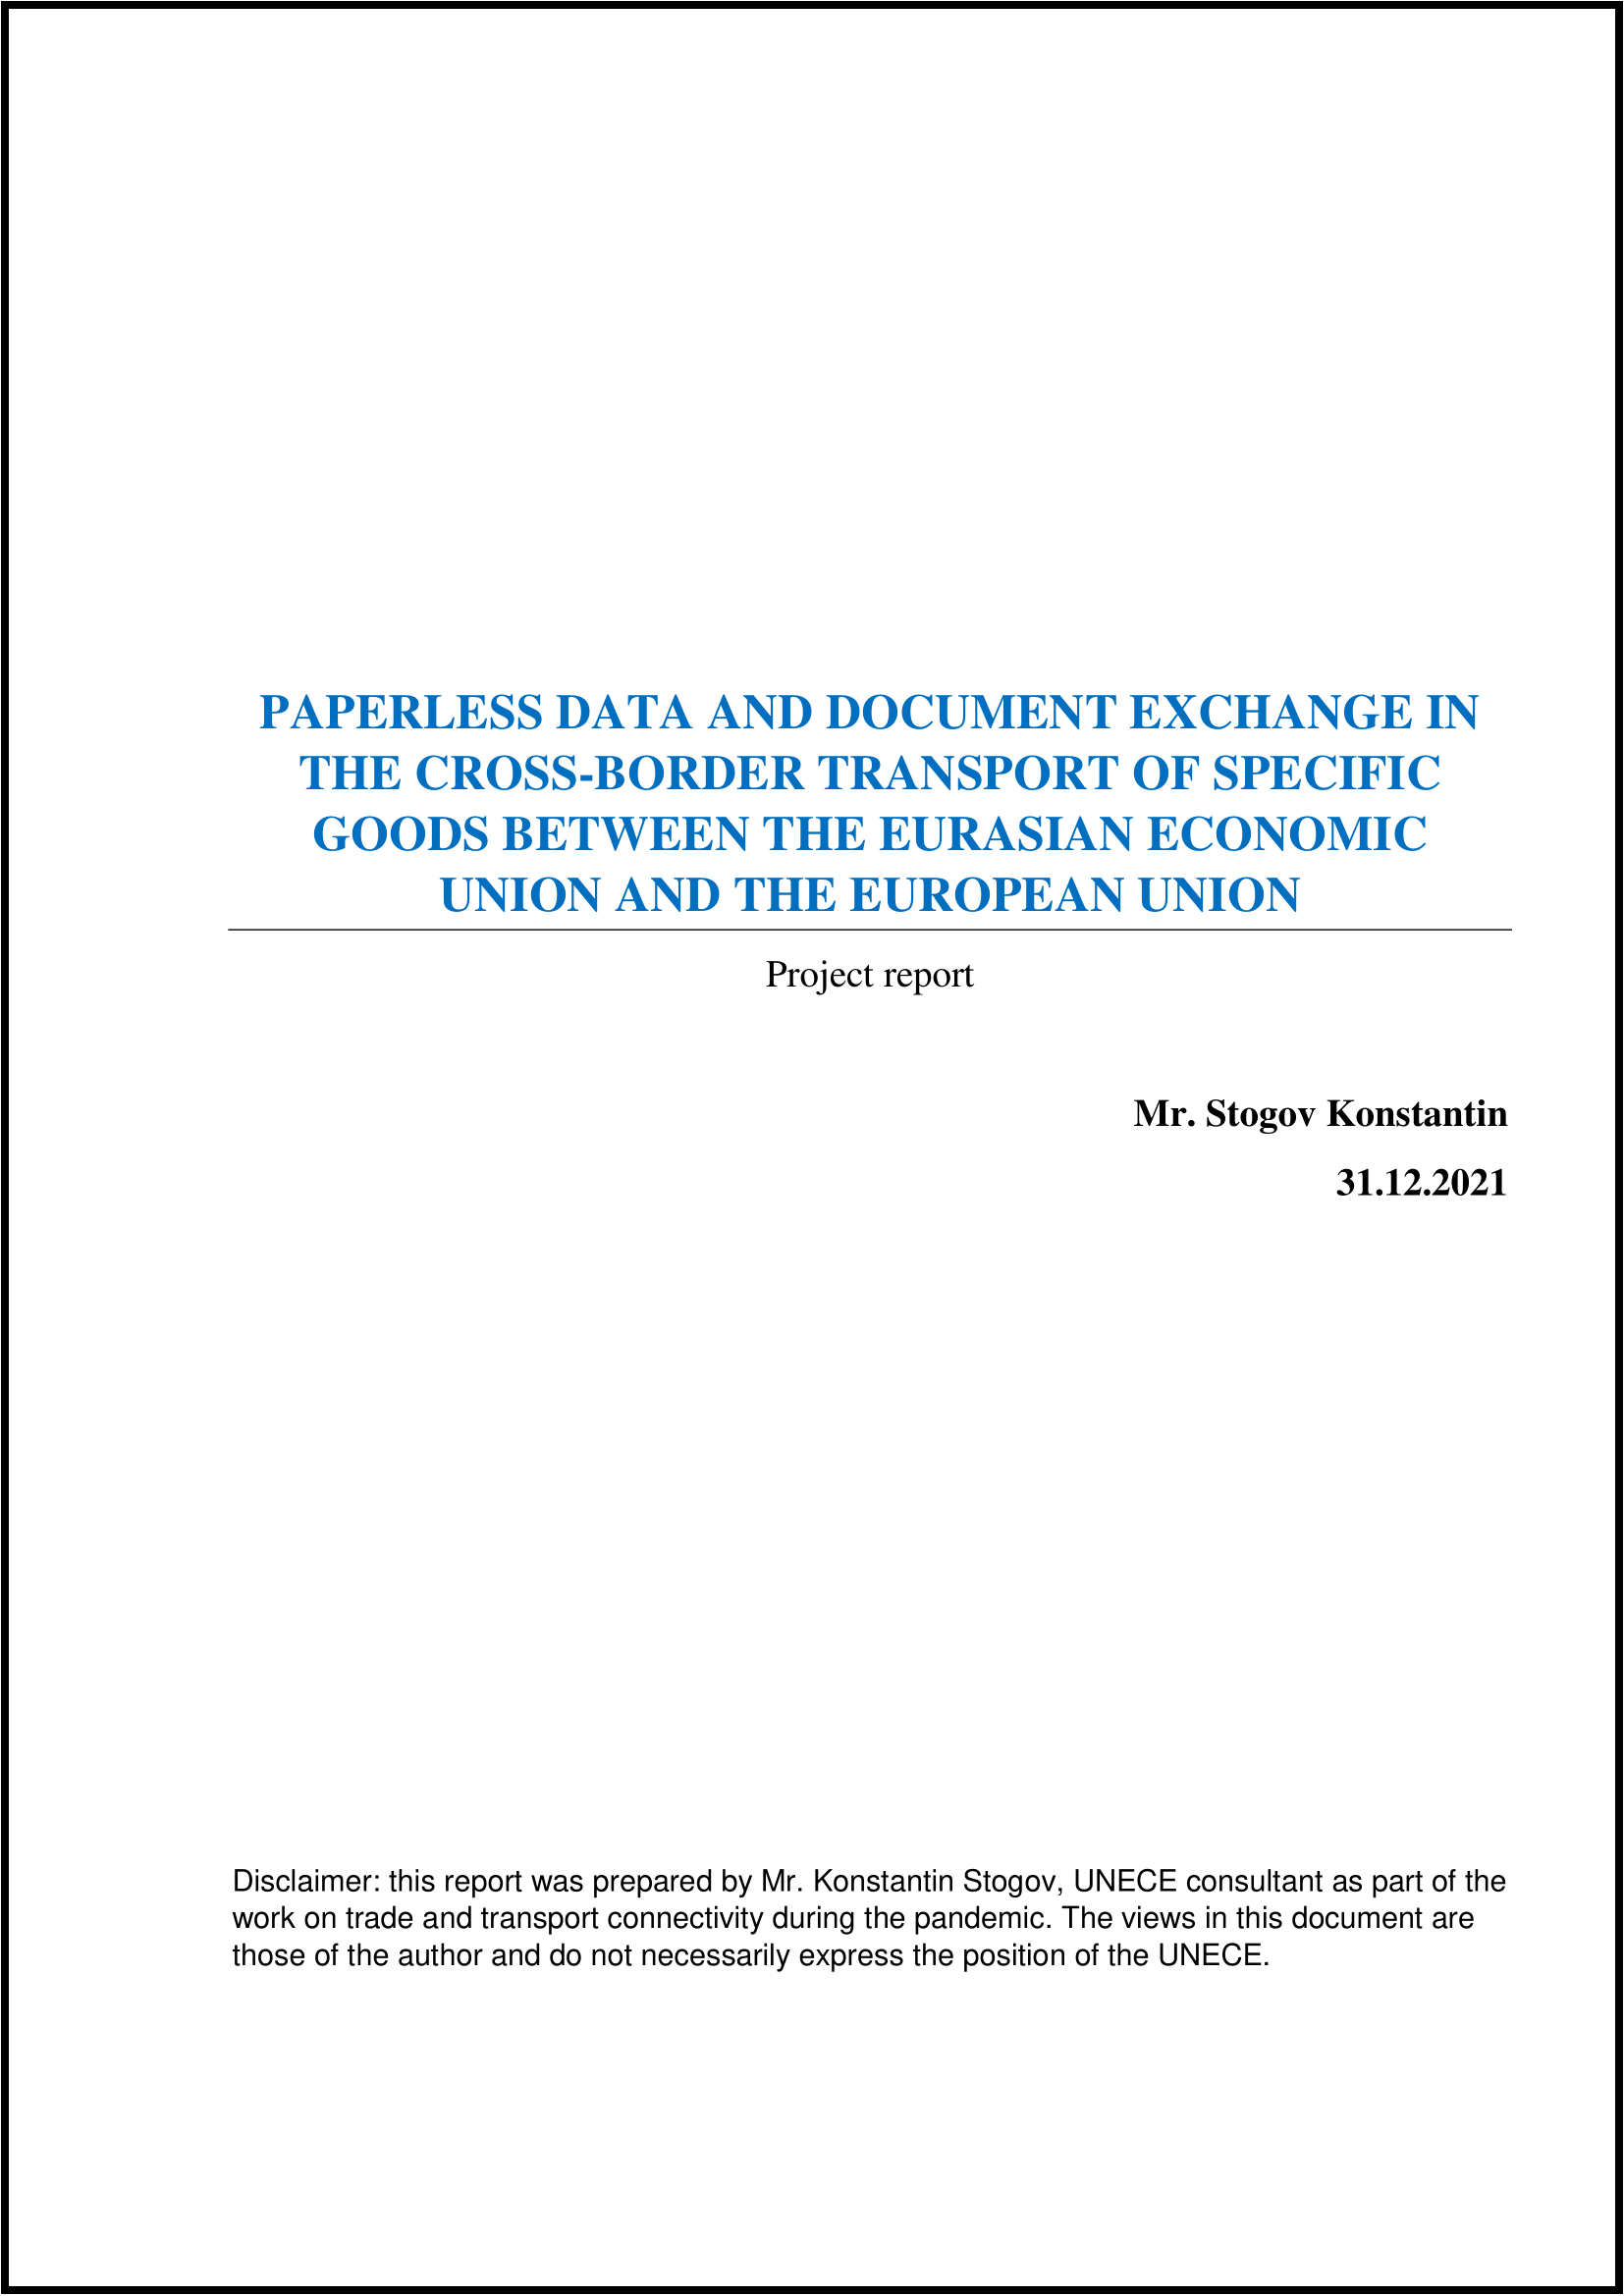 Paperless Data and Document Exchange in the Cross-Border Transport of Specific Goods between the EAEU and the EU